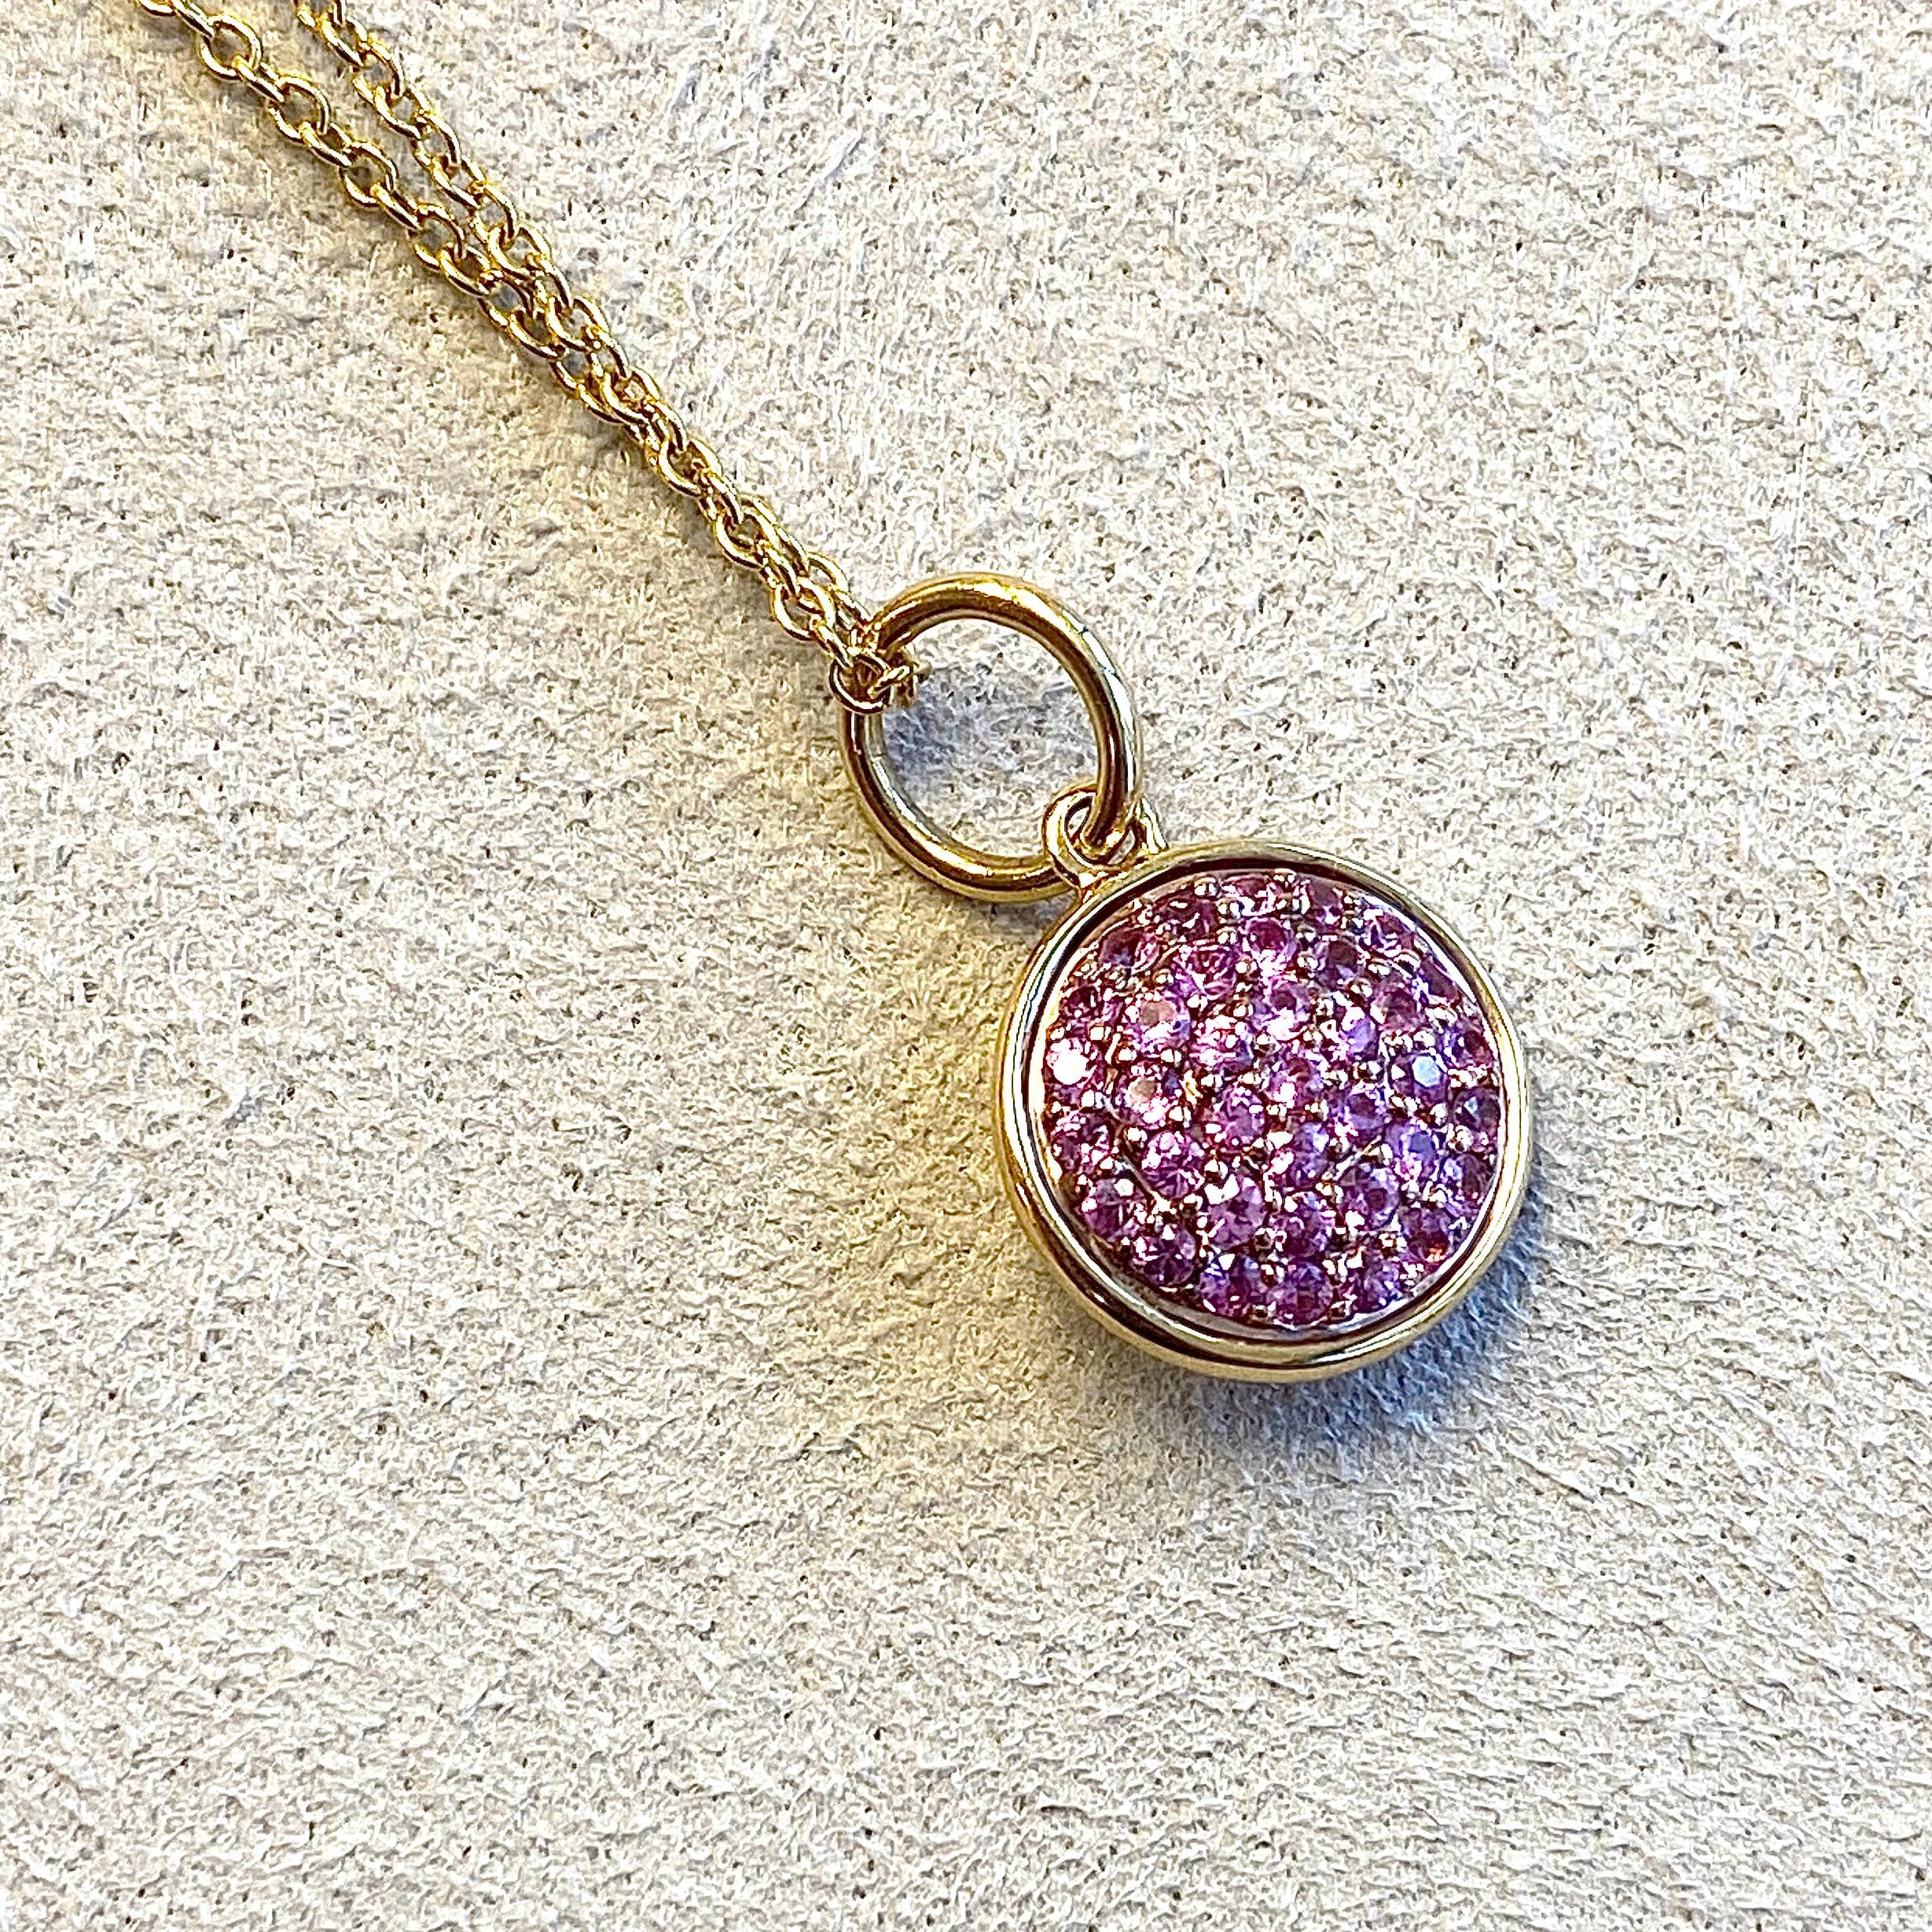 Created in 18 karat yellow gold
10 mm size charm
Pink Sapphires 0.30 ct approx
September birthstone
Chain sold separately 

Crafted from 18 karat yellow gold, this 10mm size pendant features 0.30ct of pink sapphires - the September birthstone - and